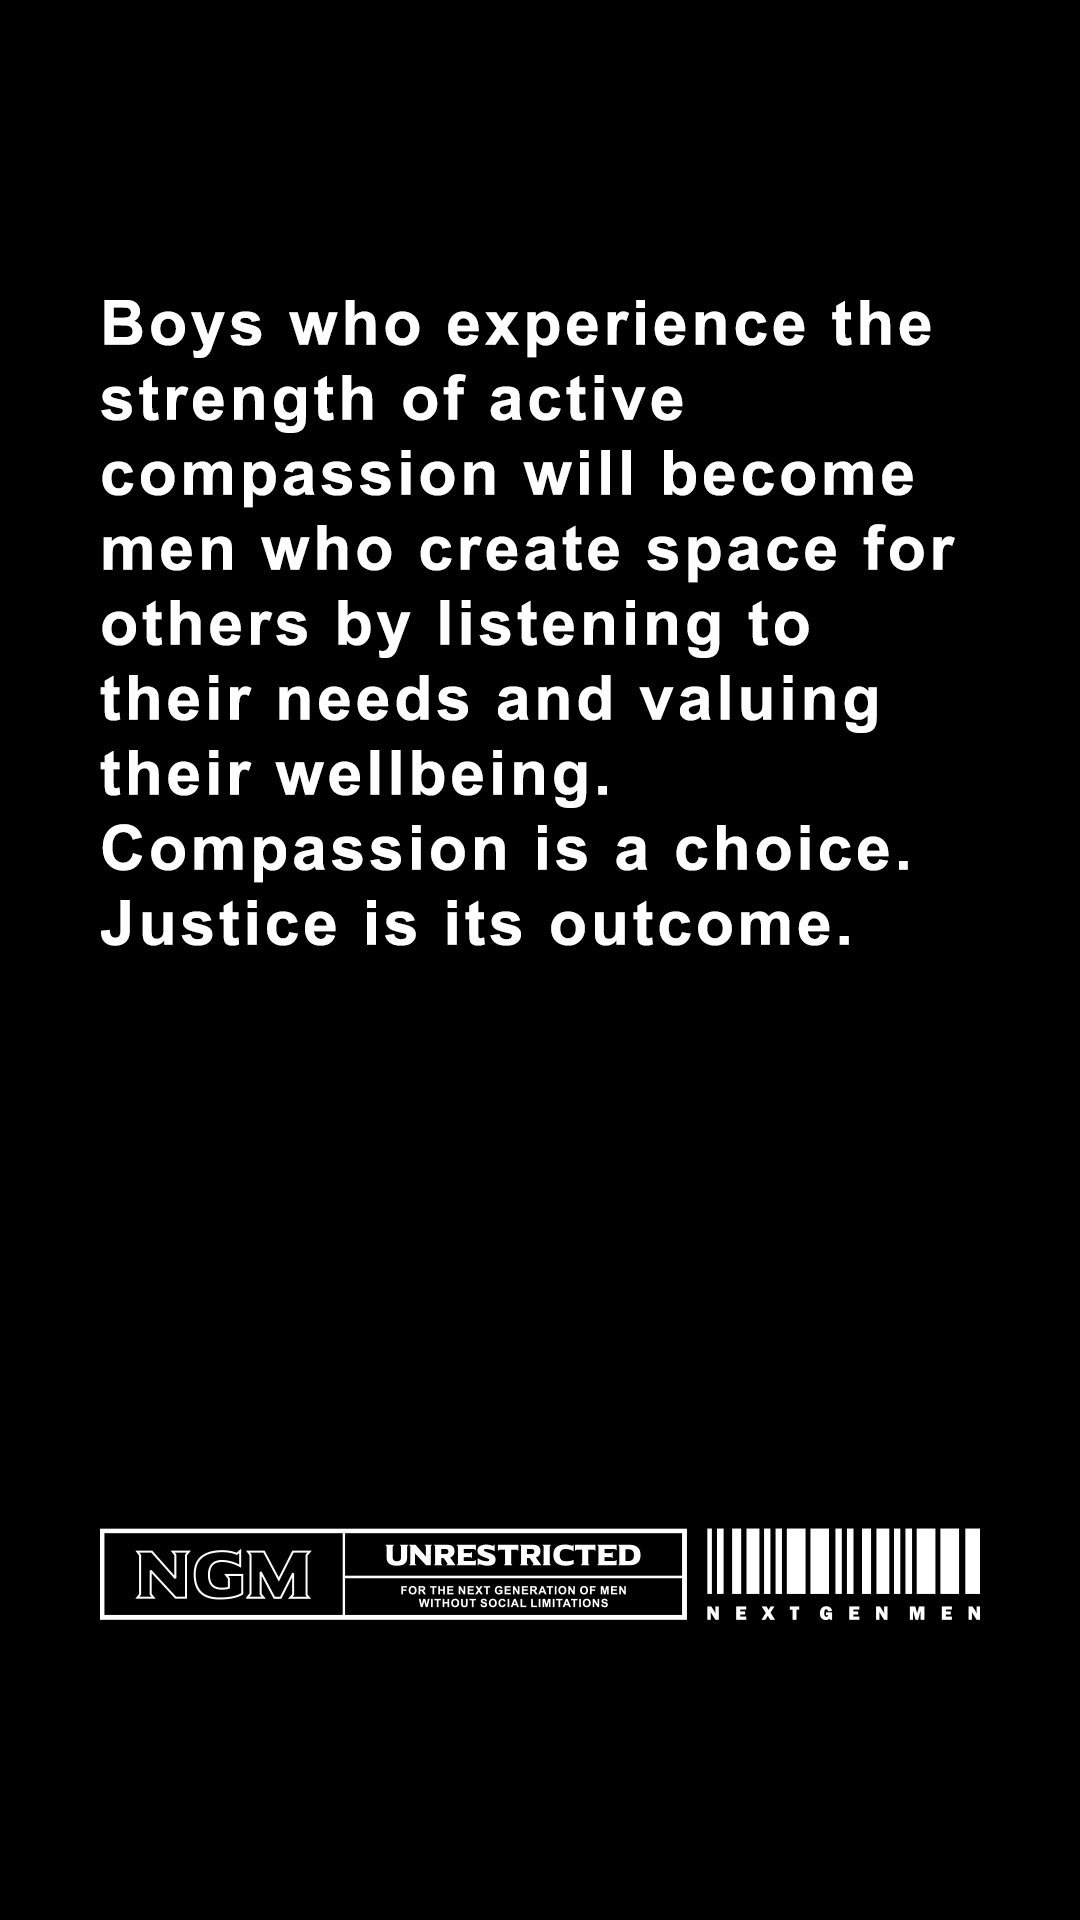  Boys who experience the strength of active compassion will become men who create space for others by listening to their needs and valuing their wellbeing. Compassion is a choice. Justice is its outcome. 